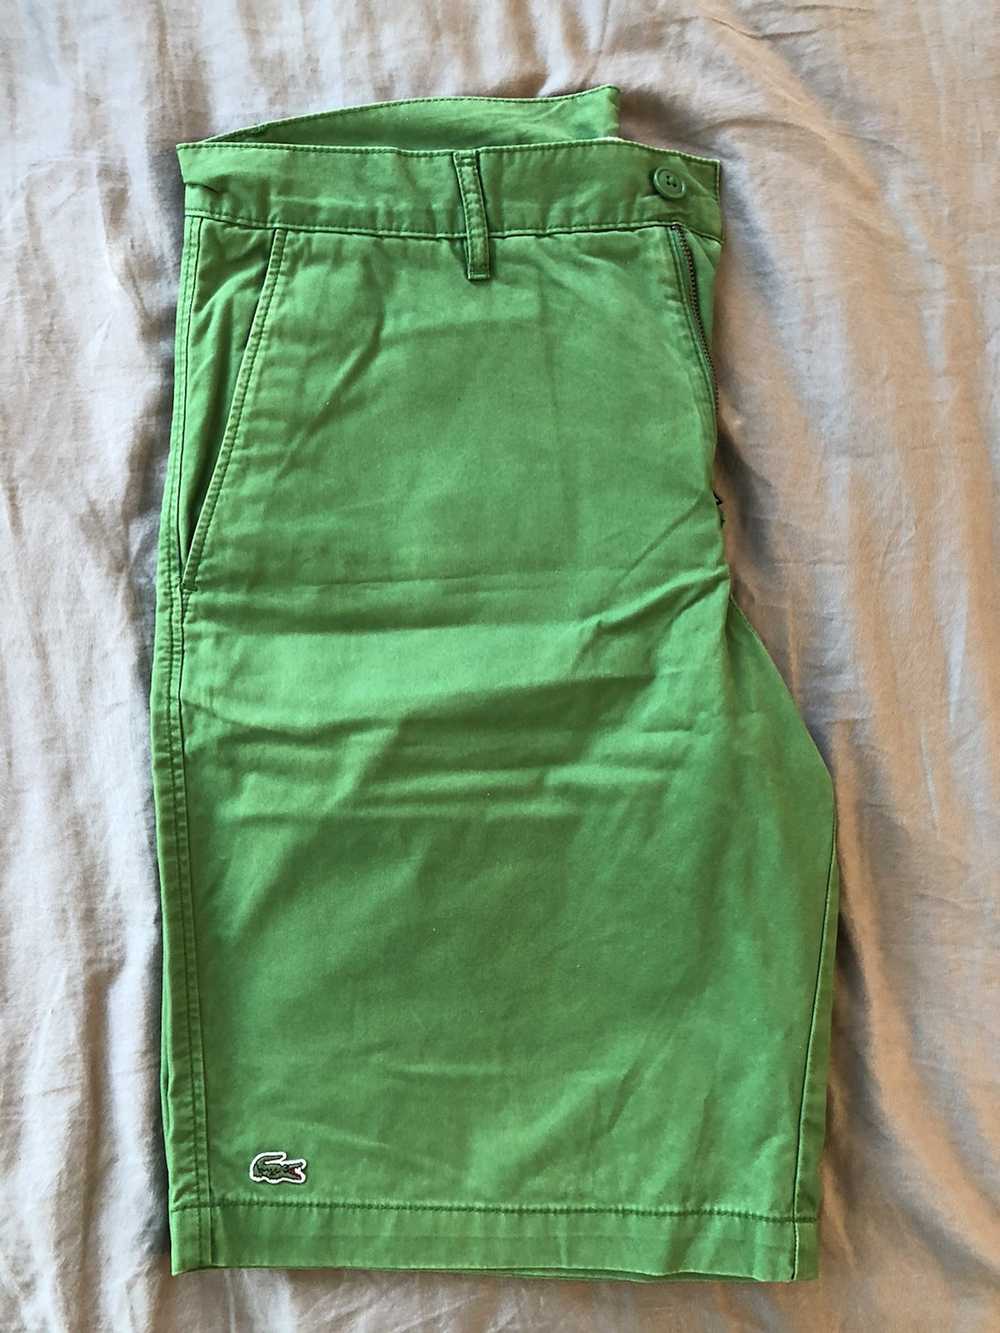 Lacoste Lacoste Green Shorts - Regular Fit - image 1